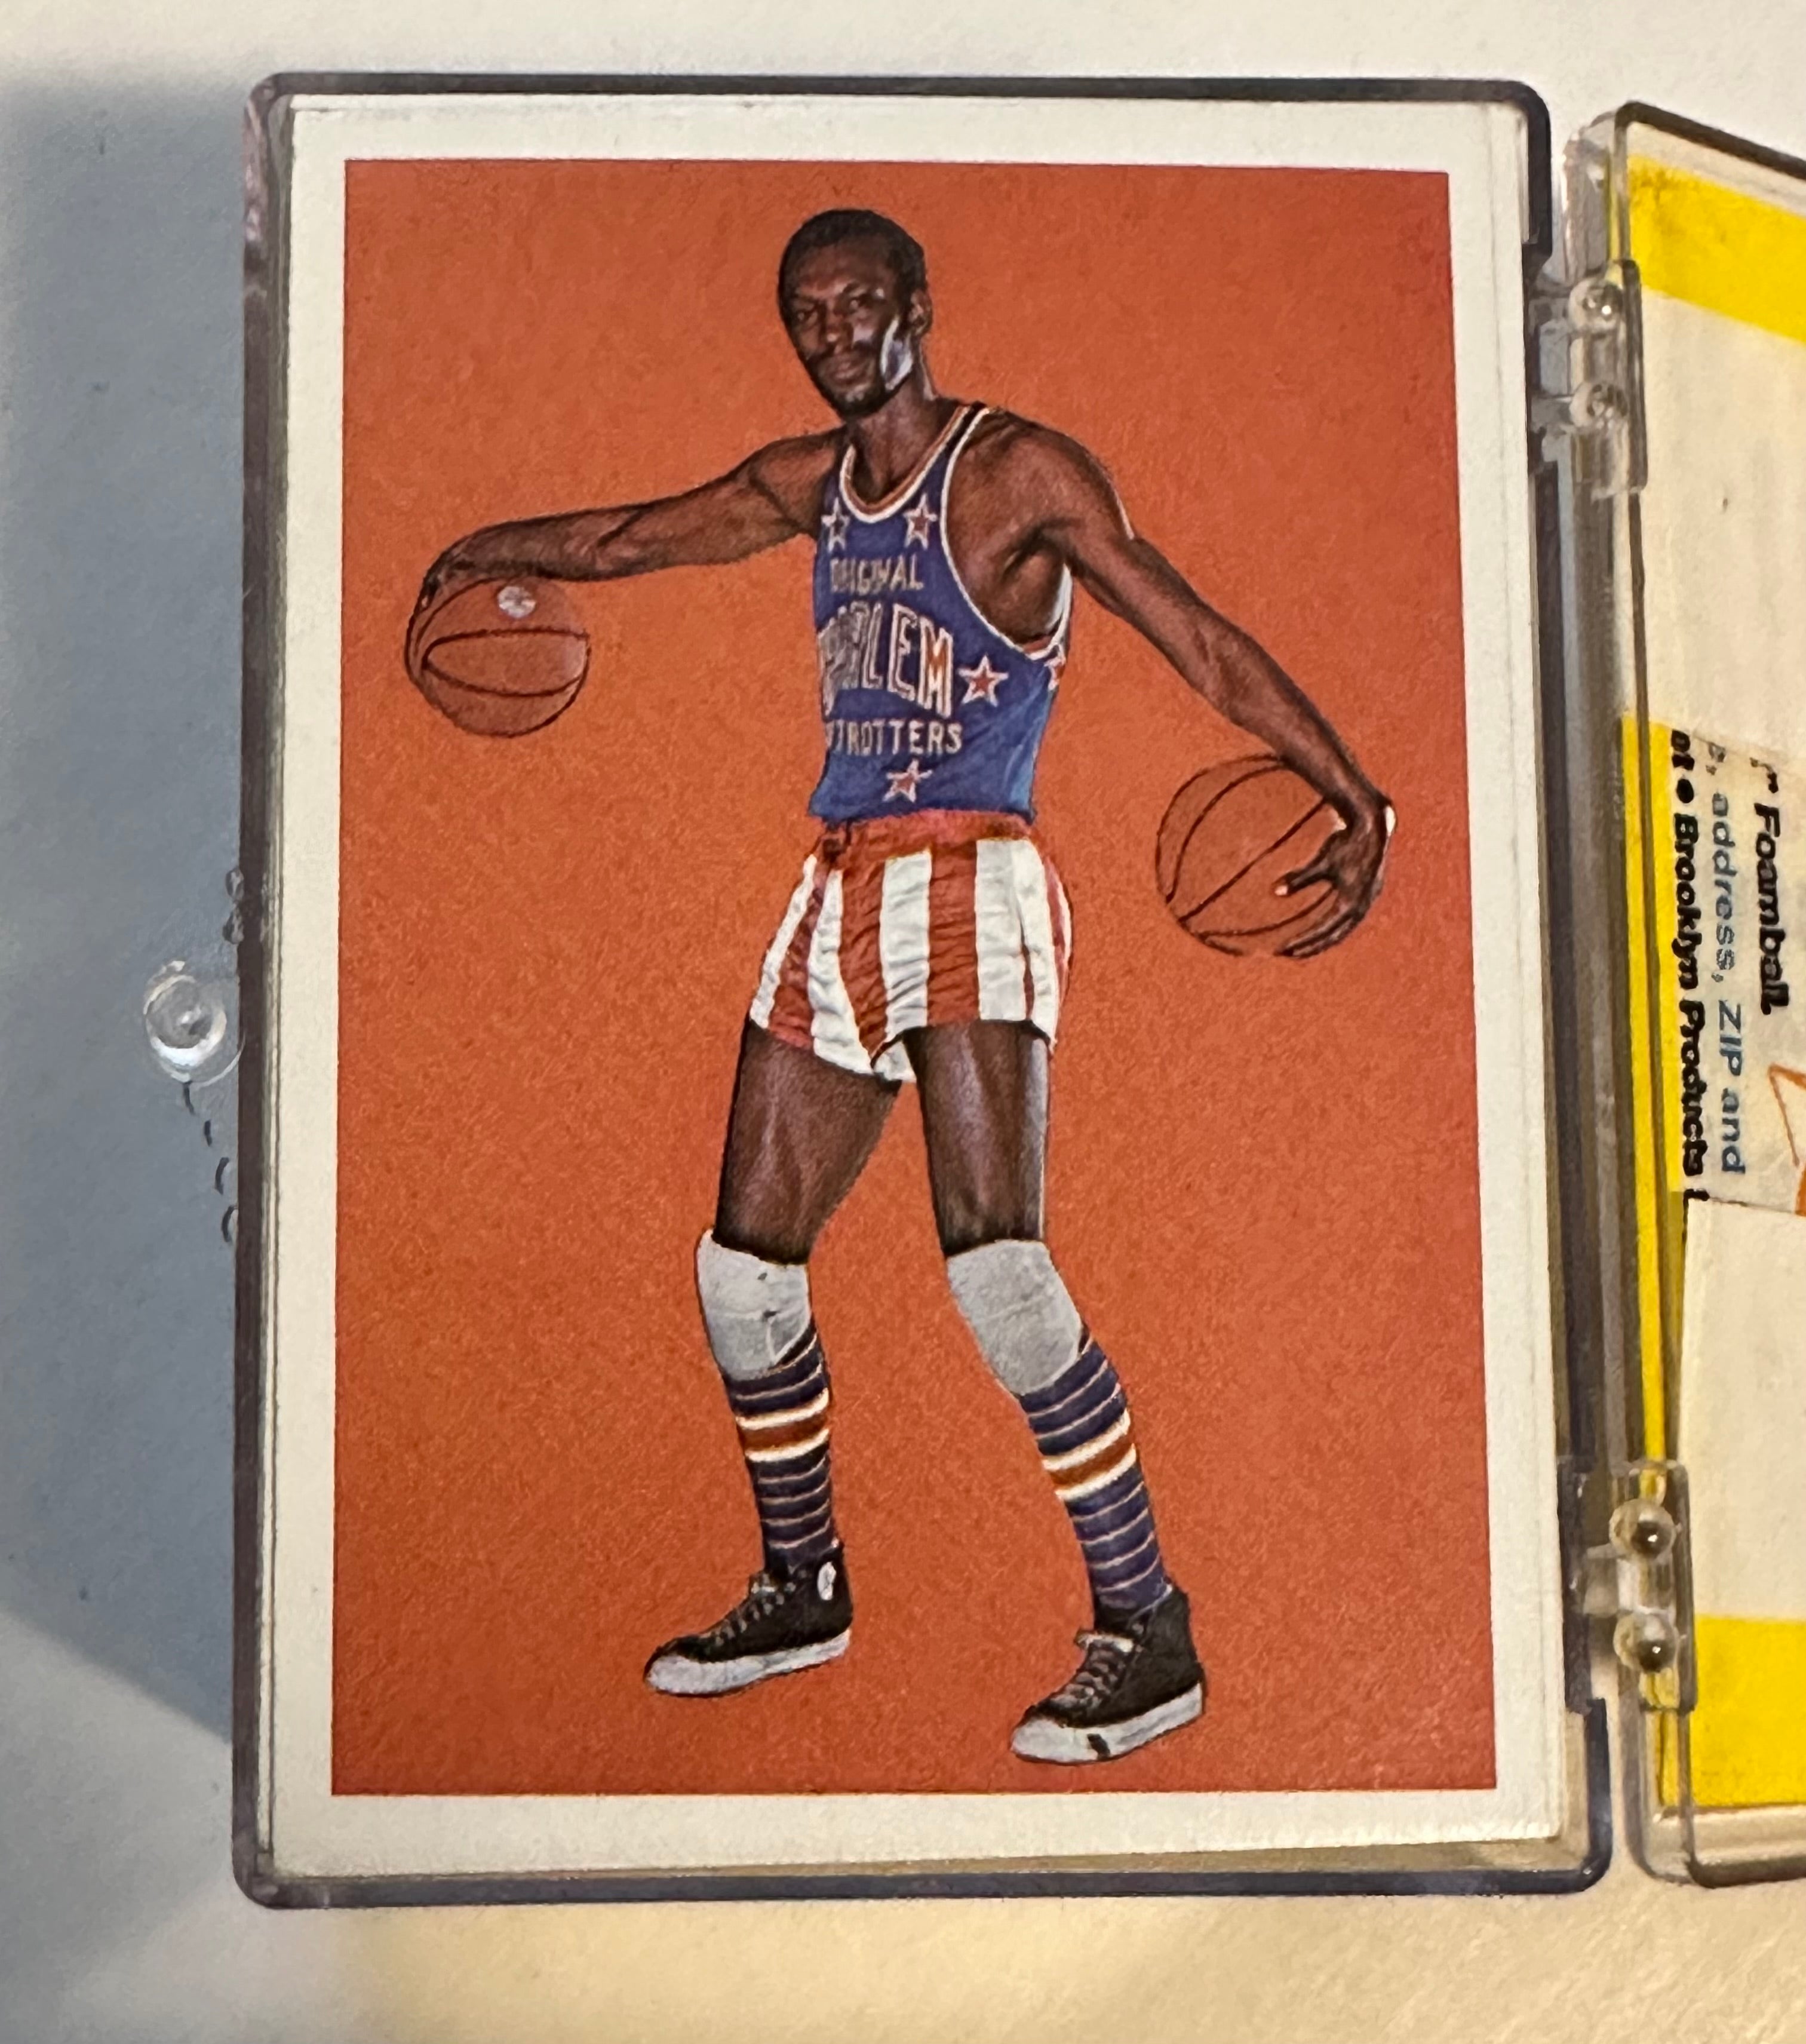 Harlem Globetrotters Topps basketball ex-nm high grade condition complete cards set with sticker and wrapper 1971